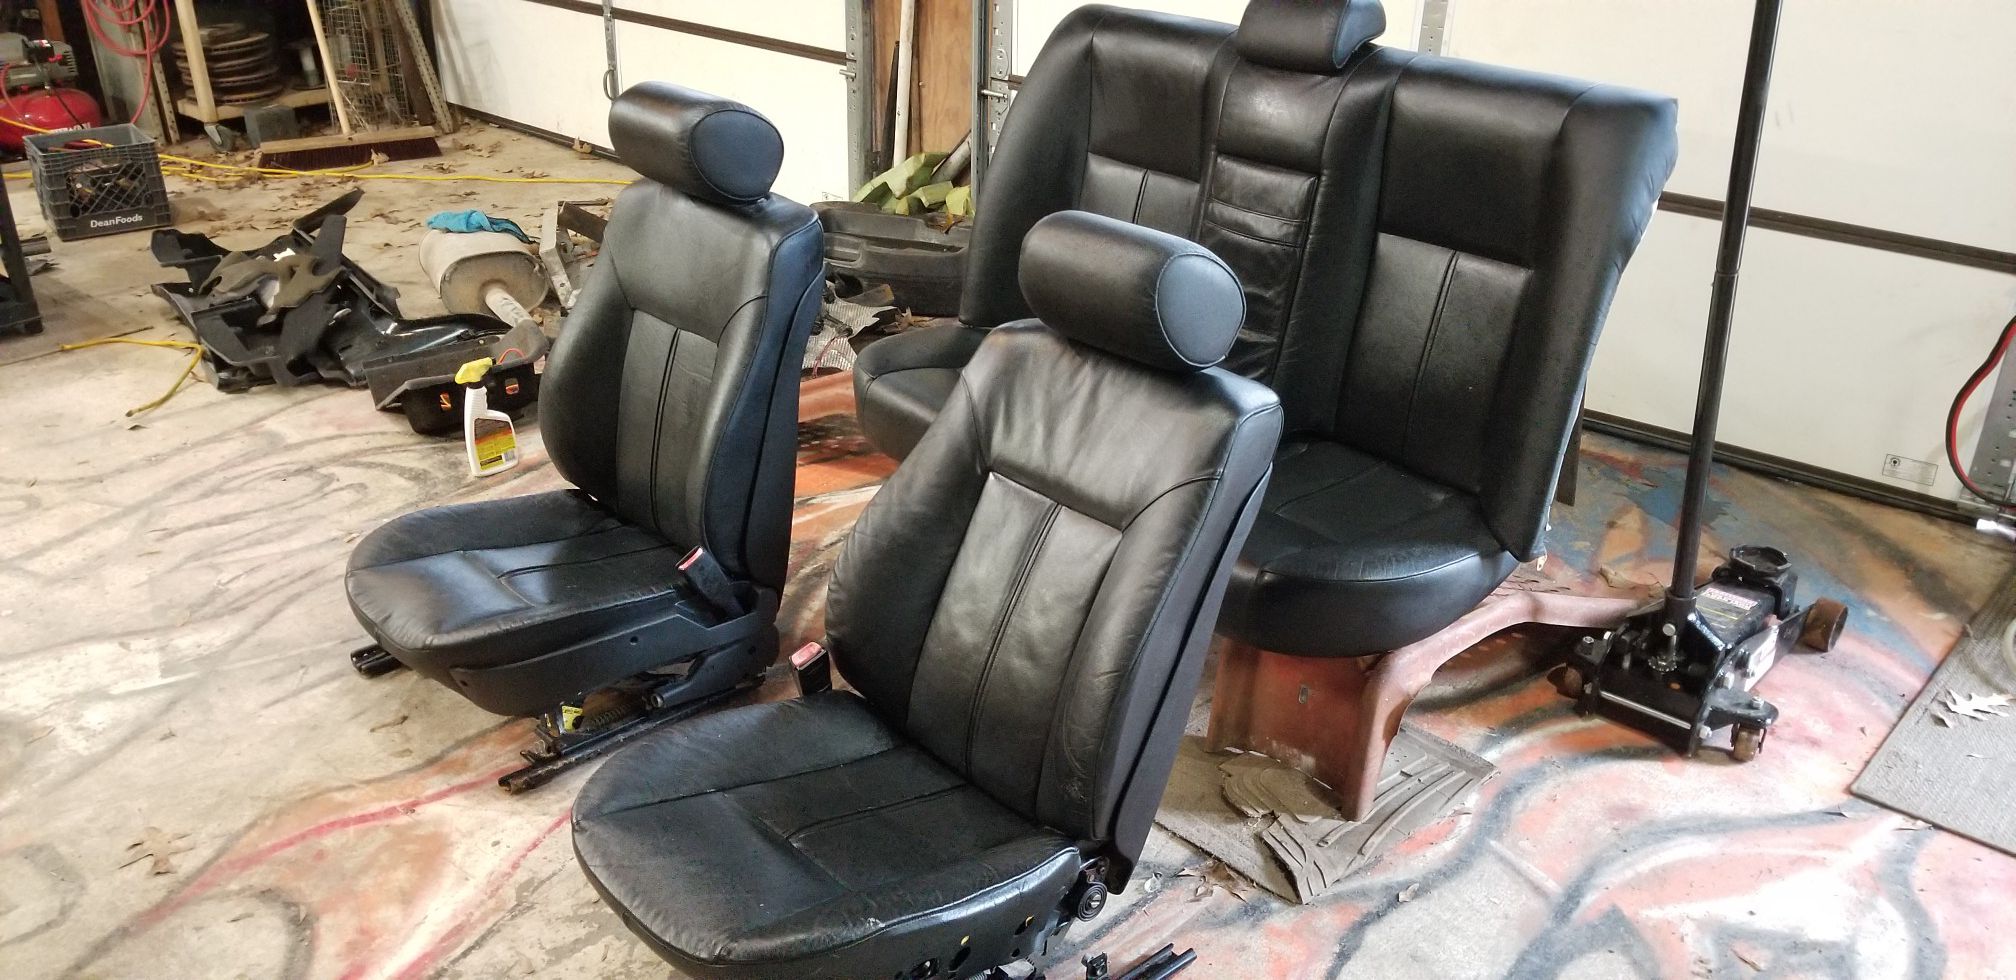 BMW e39 e46 Parts, M54 Engine and Transmission, Full Black Interior, Seats and More